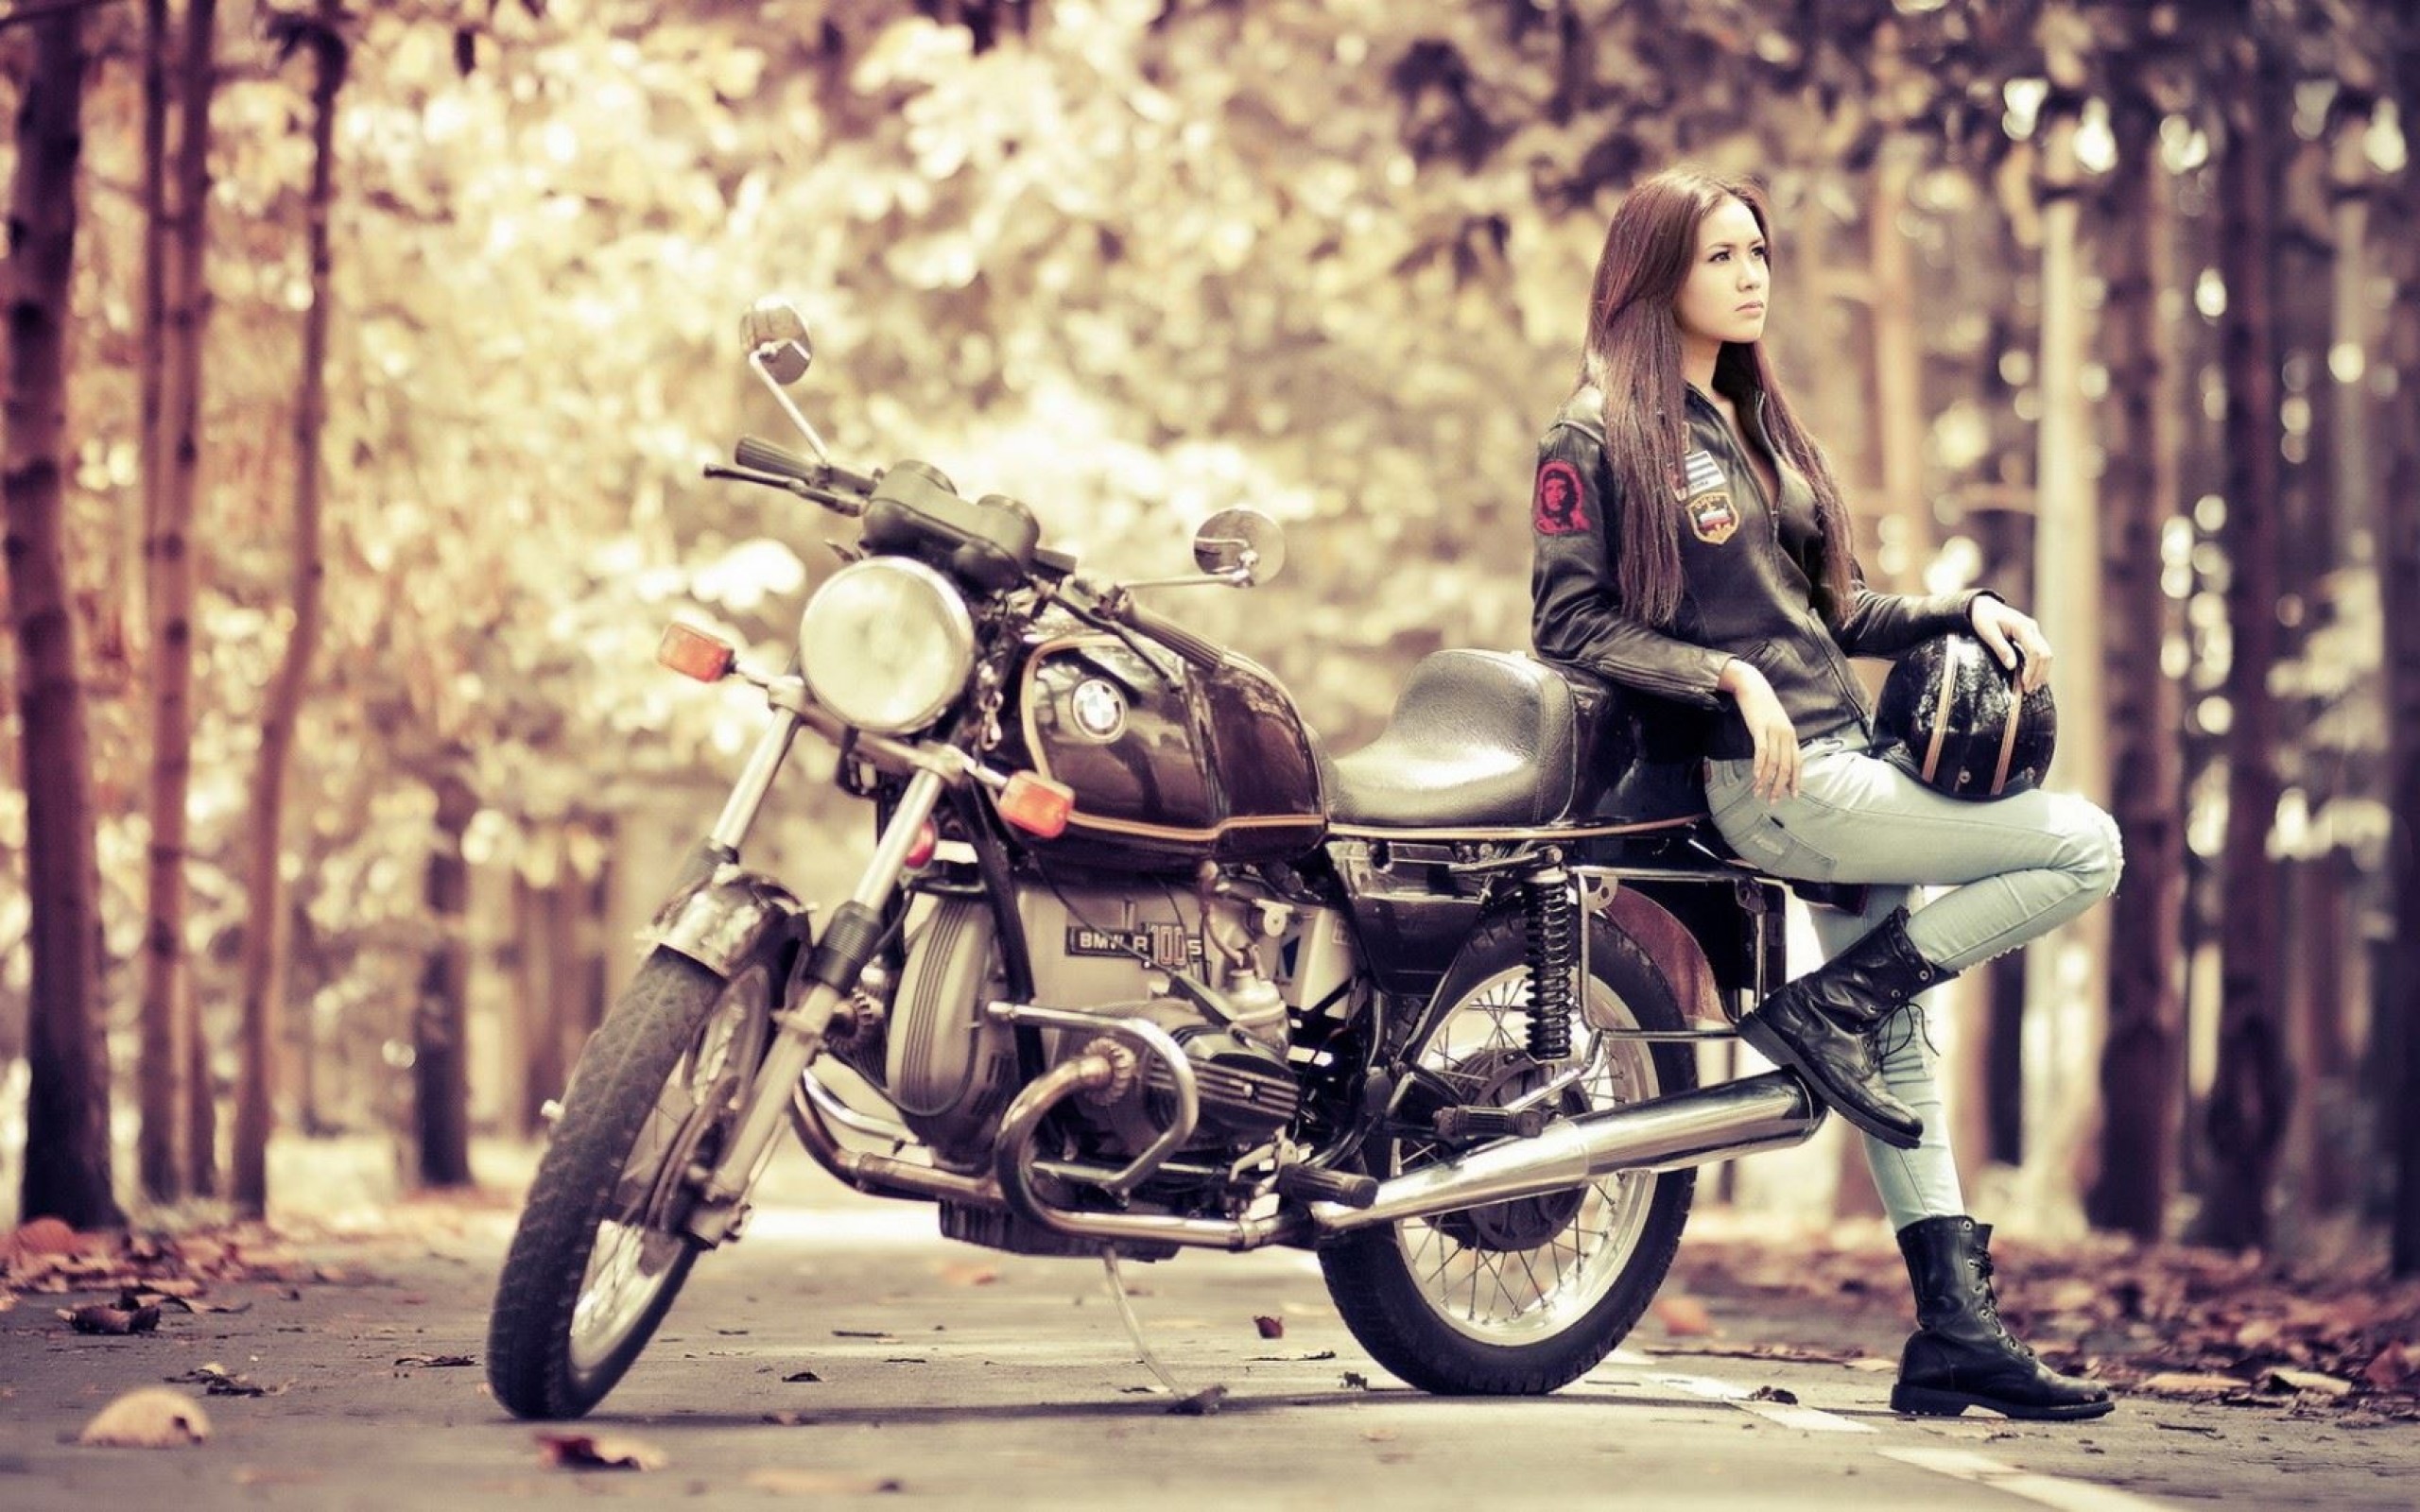 2560x1600 Girls & Motorcycles HD Wallpaper | Background Image |  | ID:539600  - Wallpaper Abyss